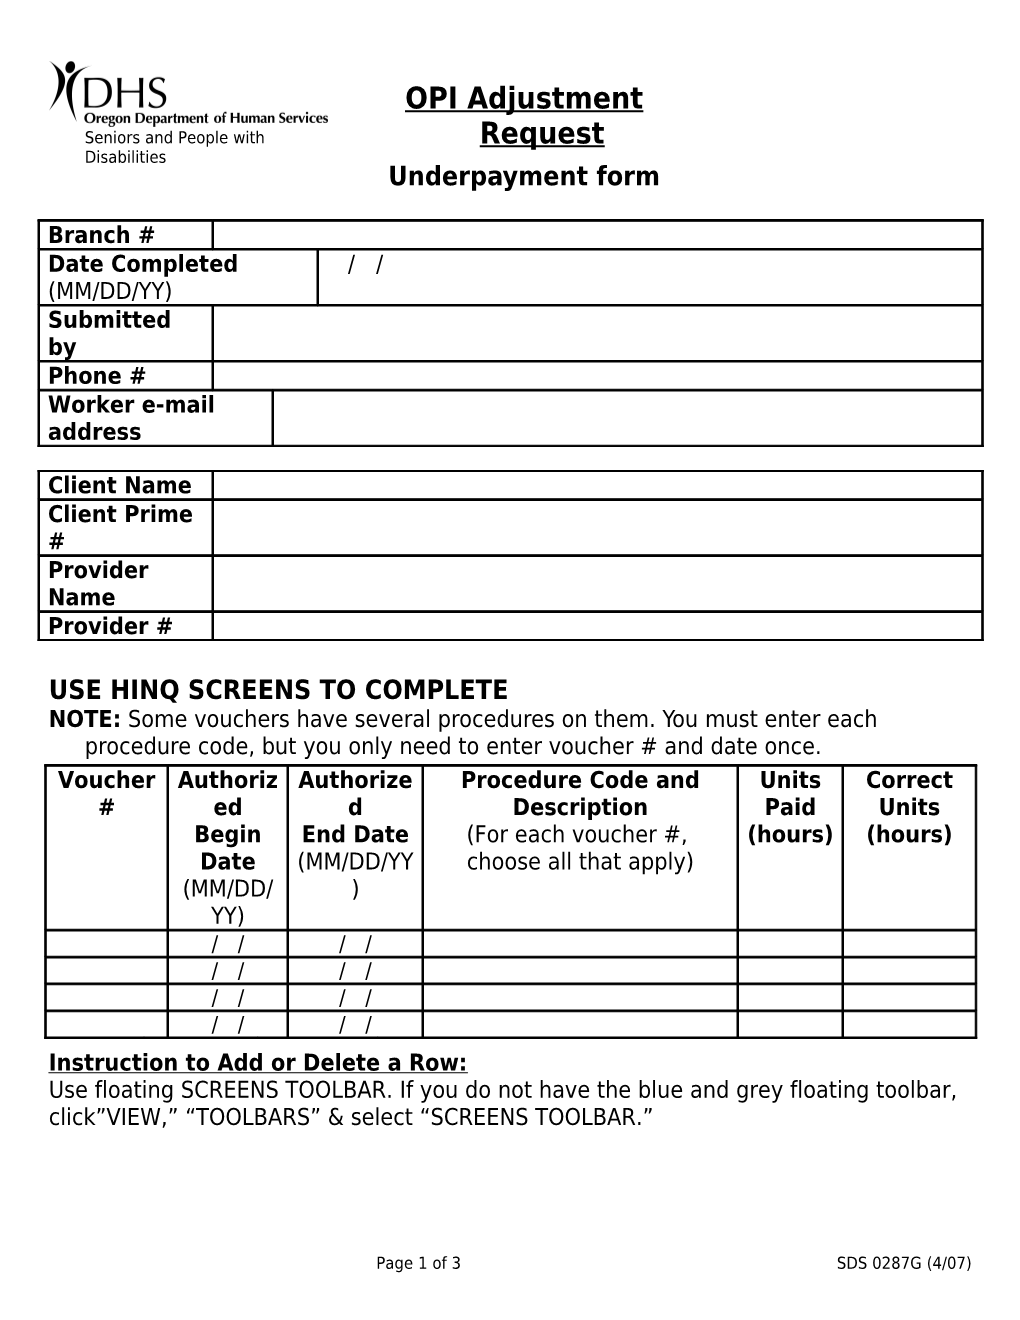 HCW Underpayment Form